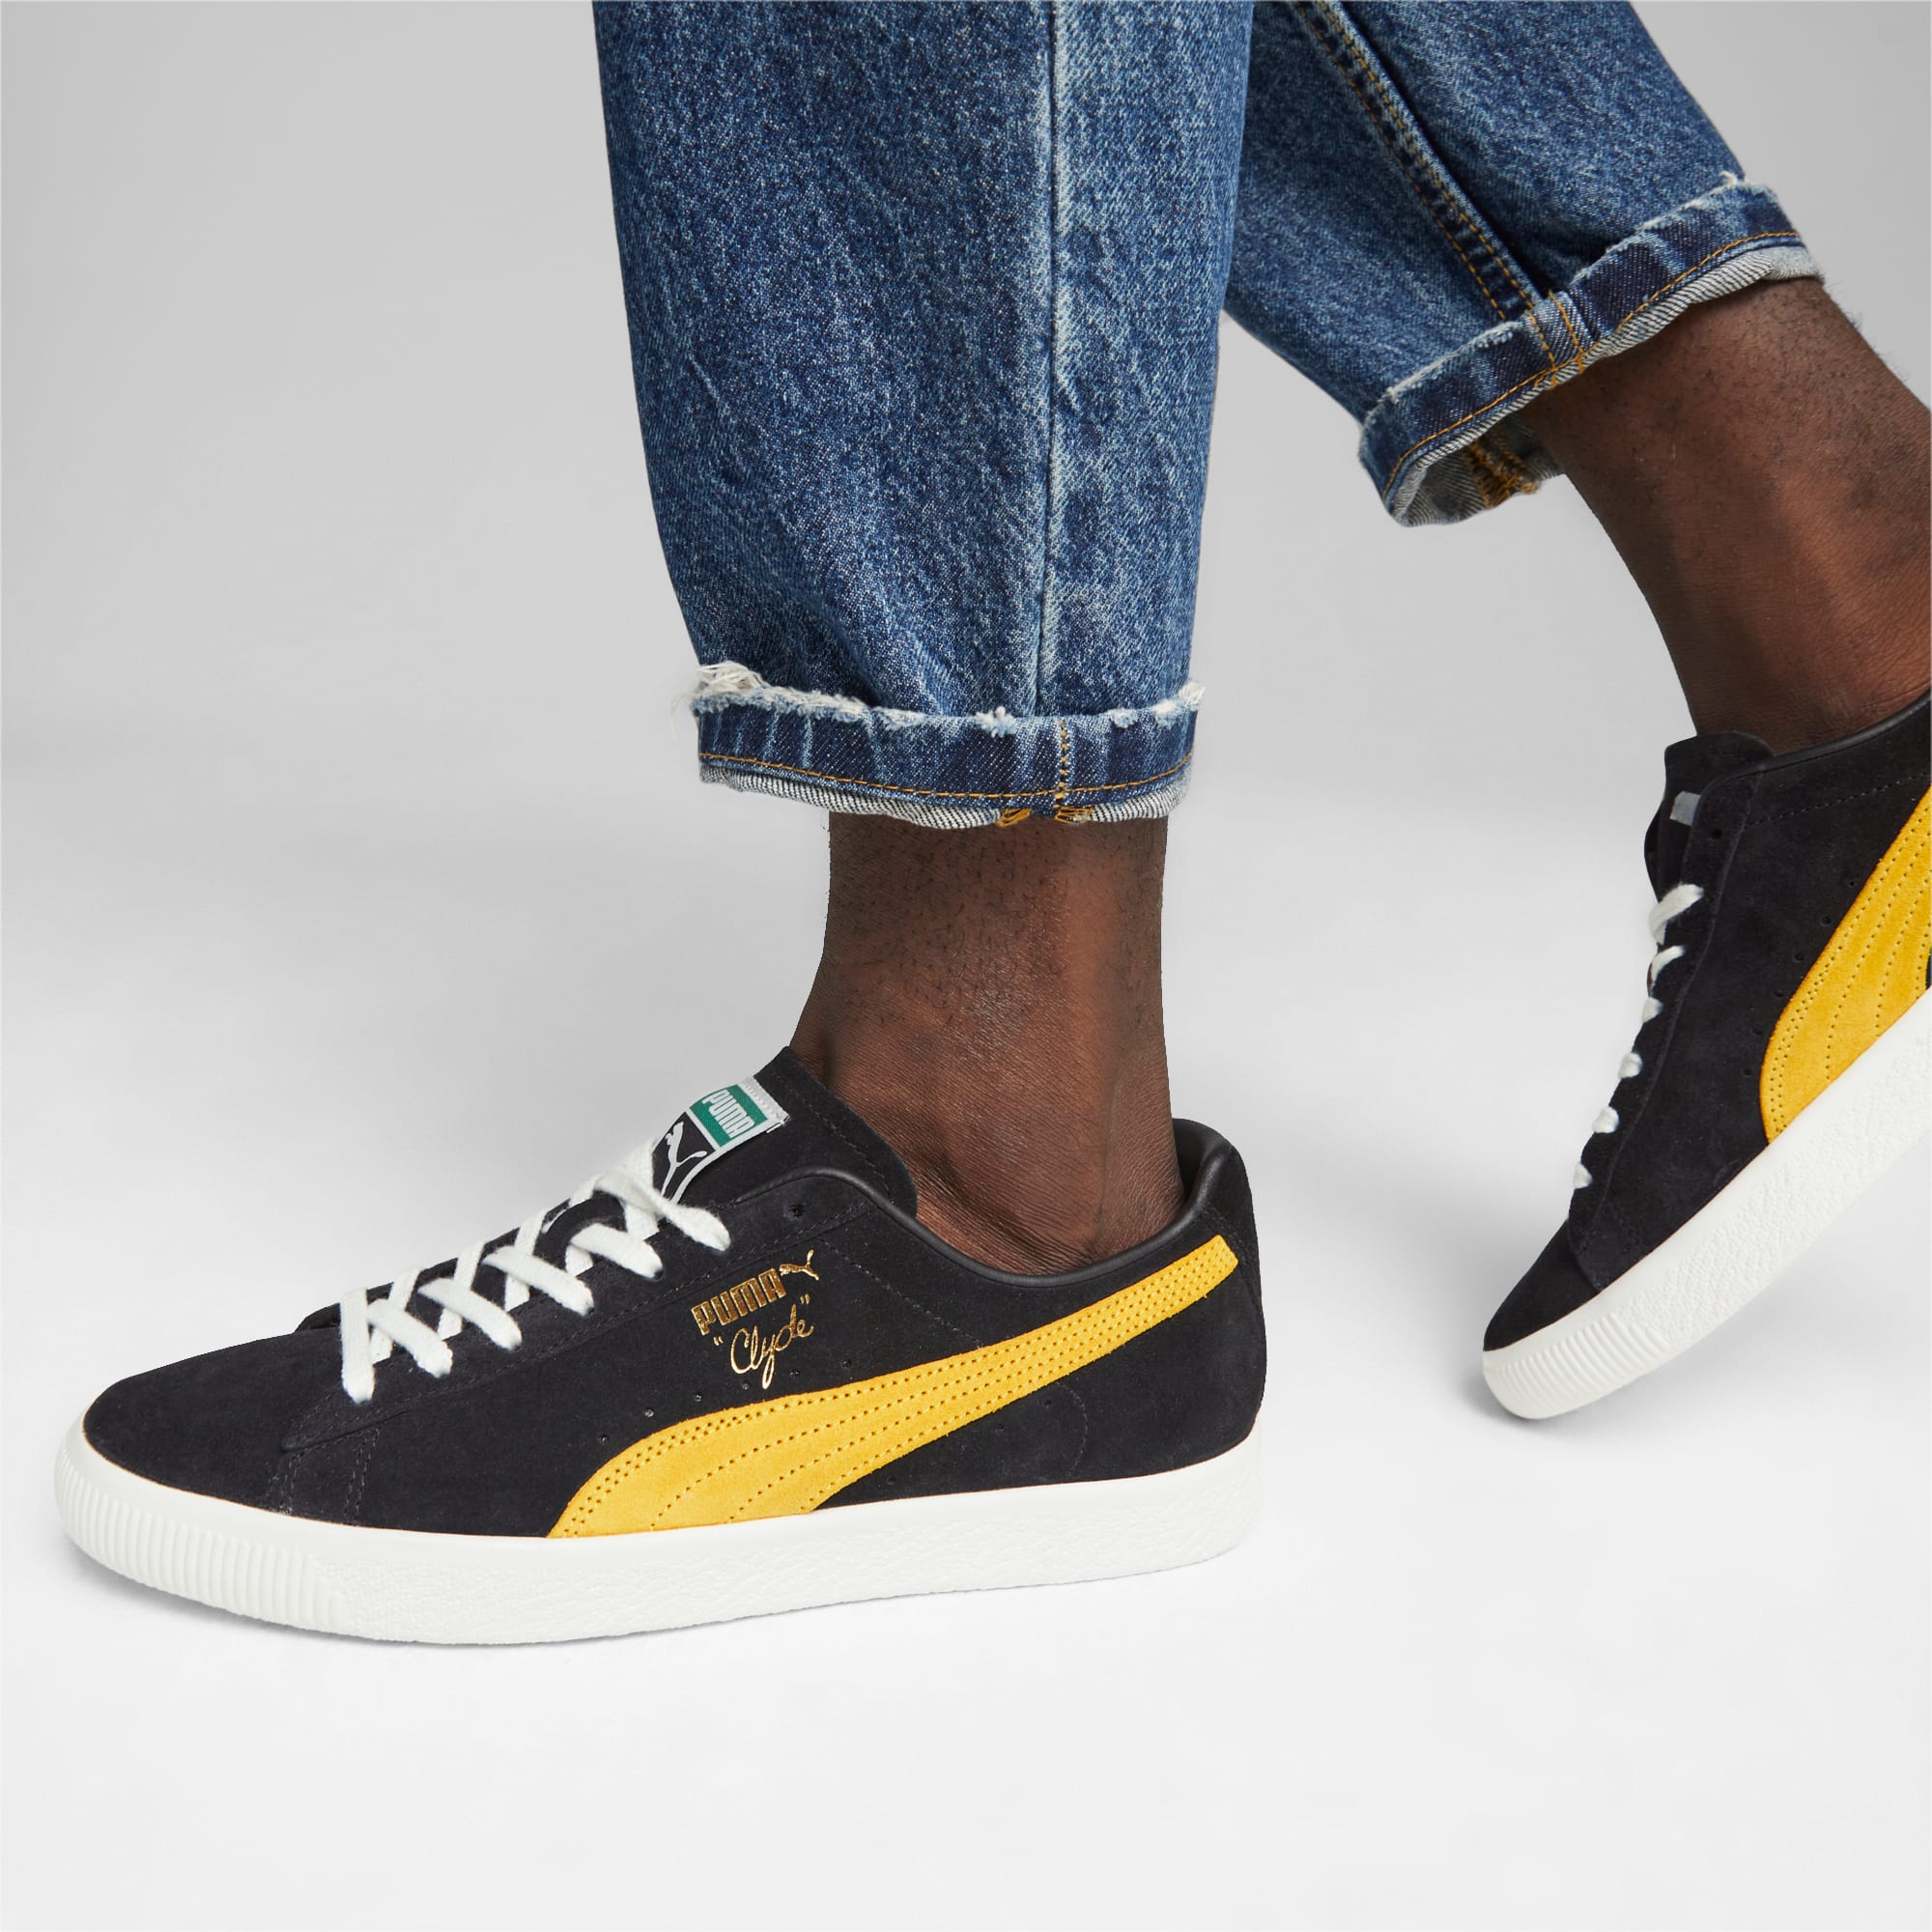 Women's PUMA Clyde OG Sneakers, Black/Yellow Sizzle, Size 35,5, Shoes